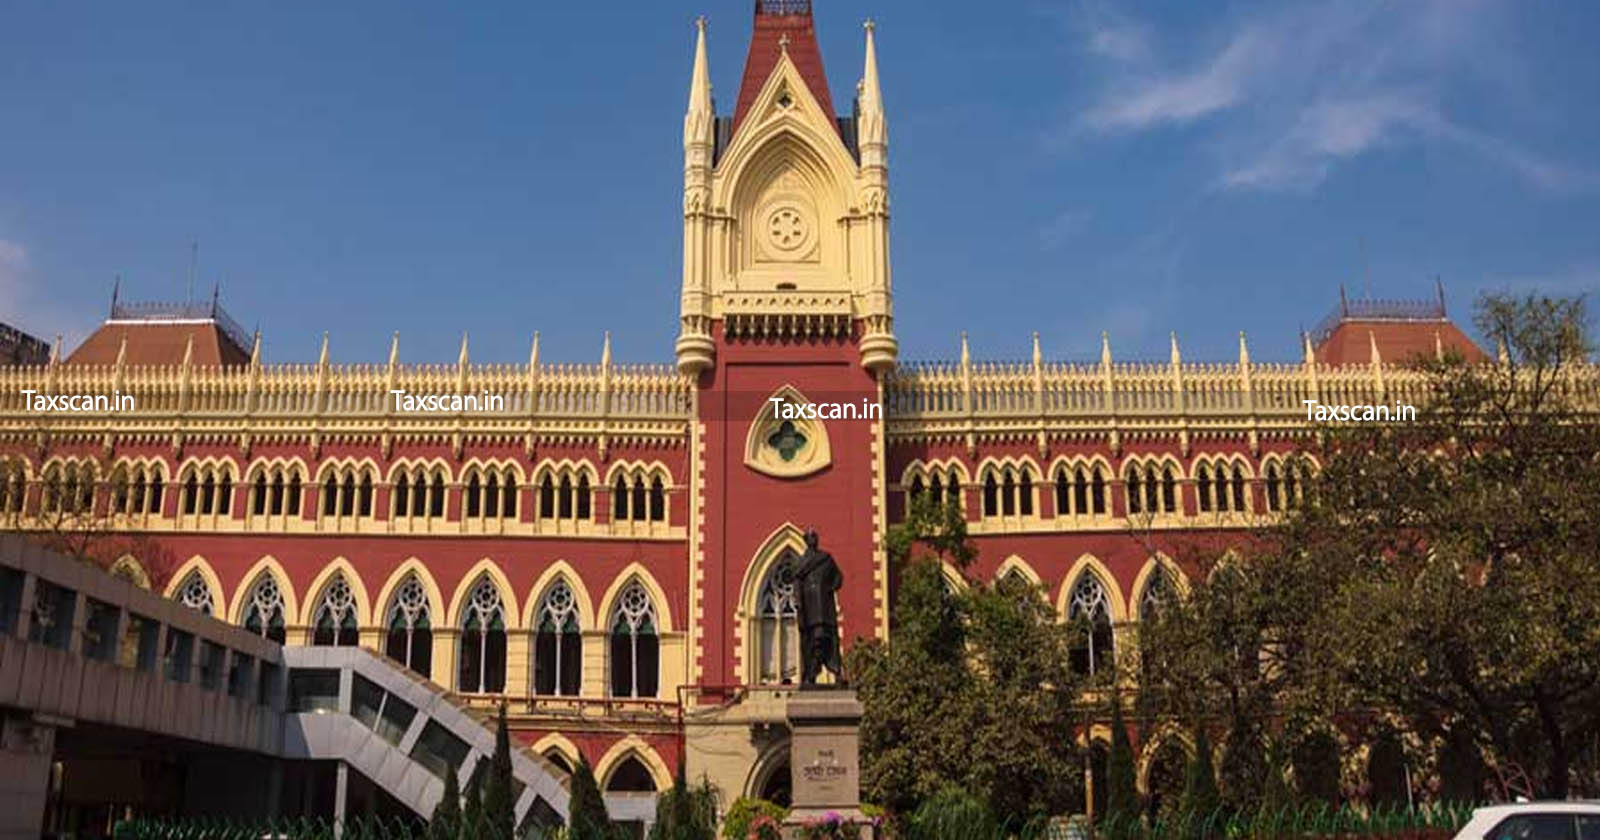 High Court in its Writ Jurisdiction - High Court - Writ Jurisdiction - AO - Scrutinise Facts and Evidences - Scrutinise Facts - Evidences - Calcutta High Court - taxscan